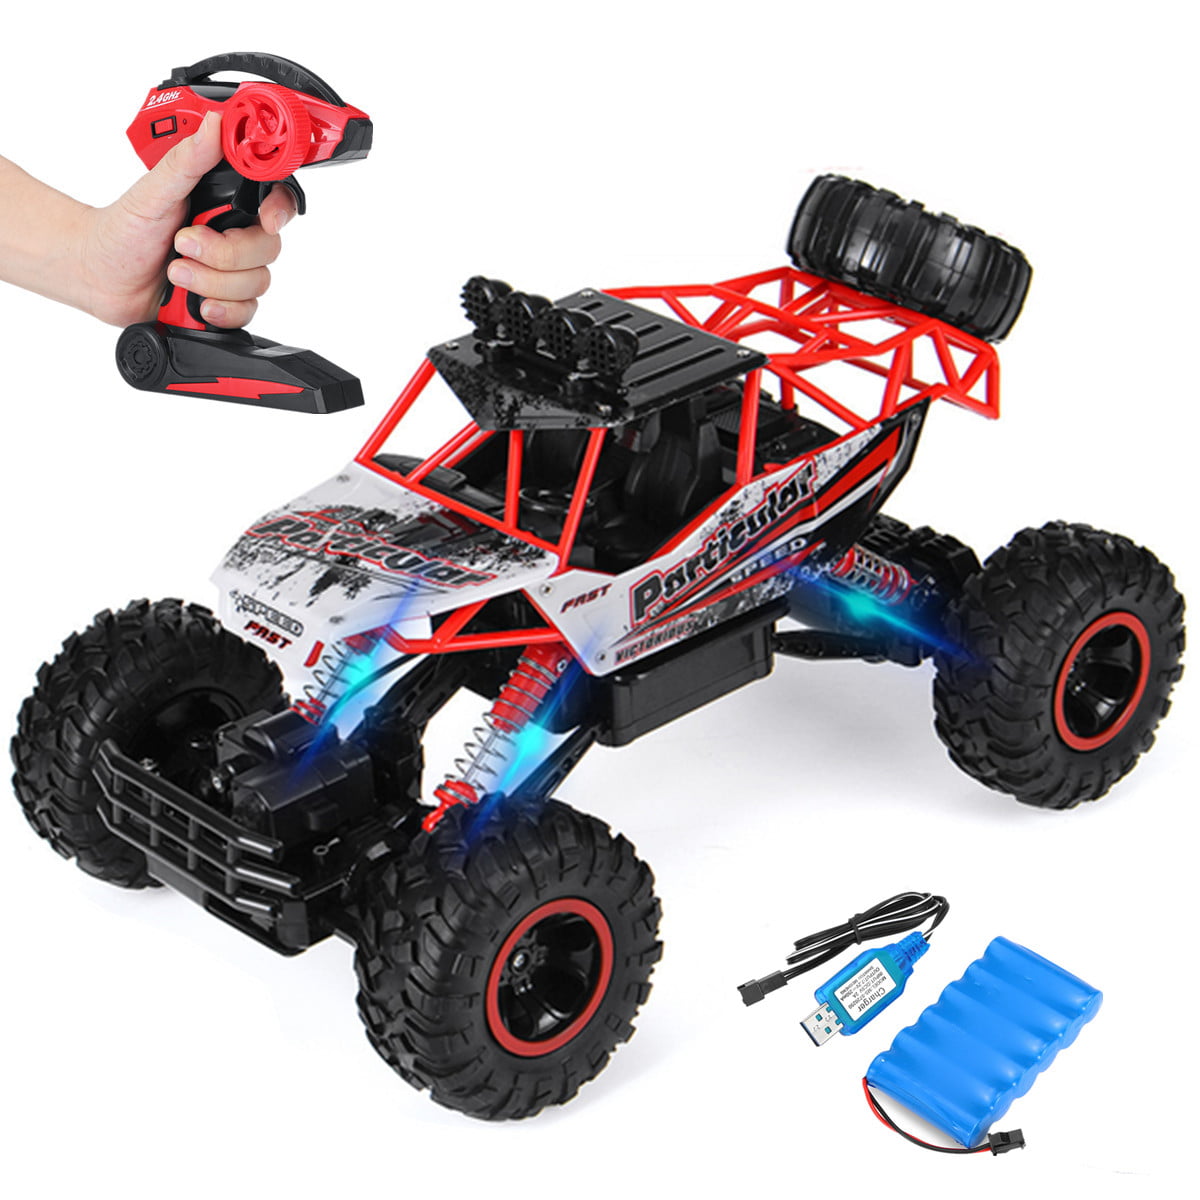 Powerful Wall Climbing Remote Control Car Radio Controlled Stunt Racing Kids Toy 